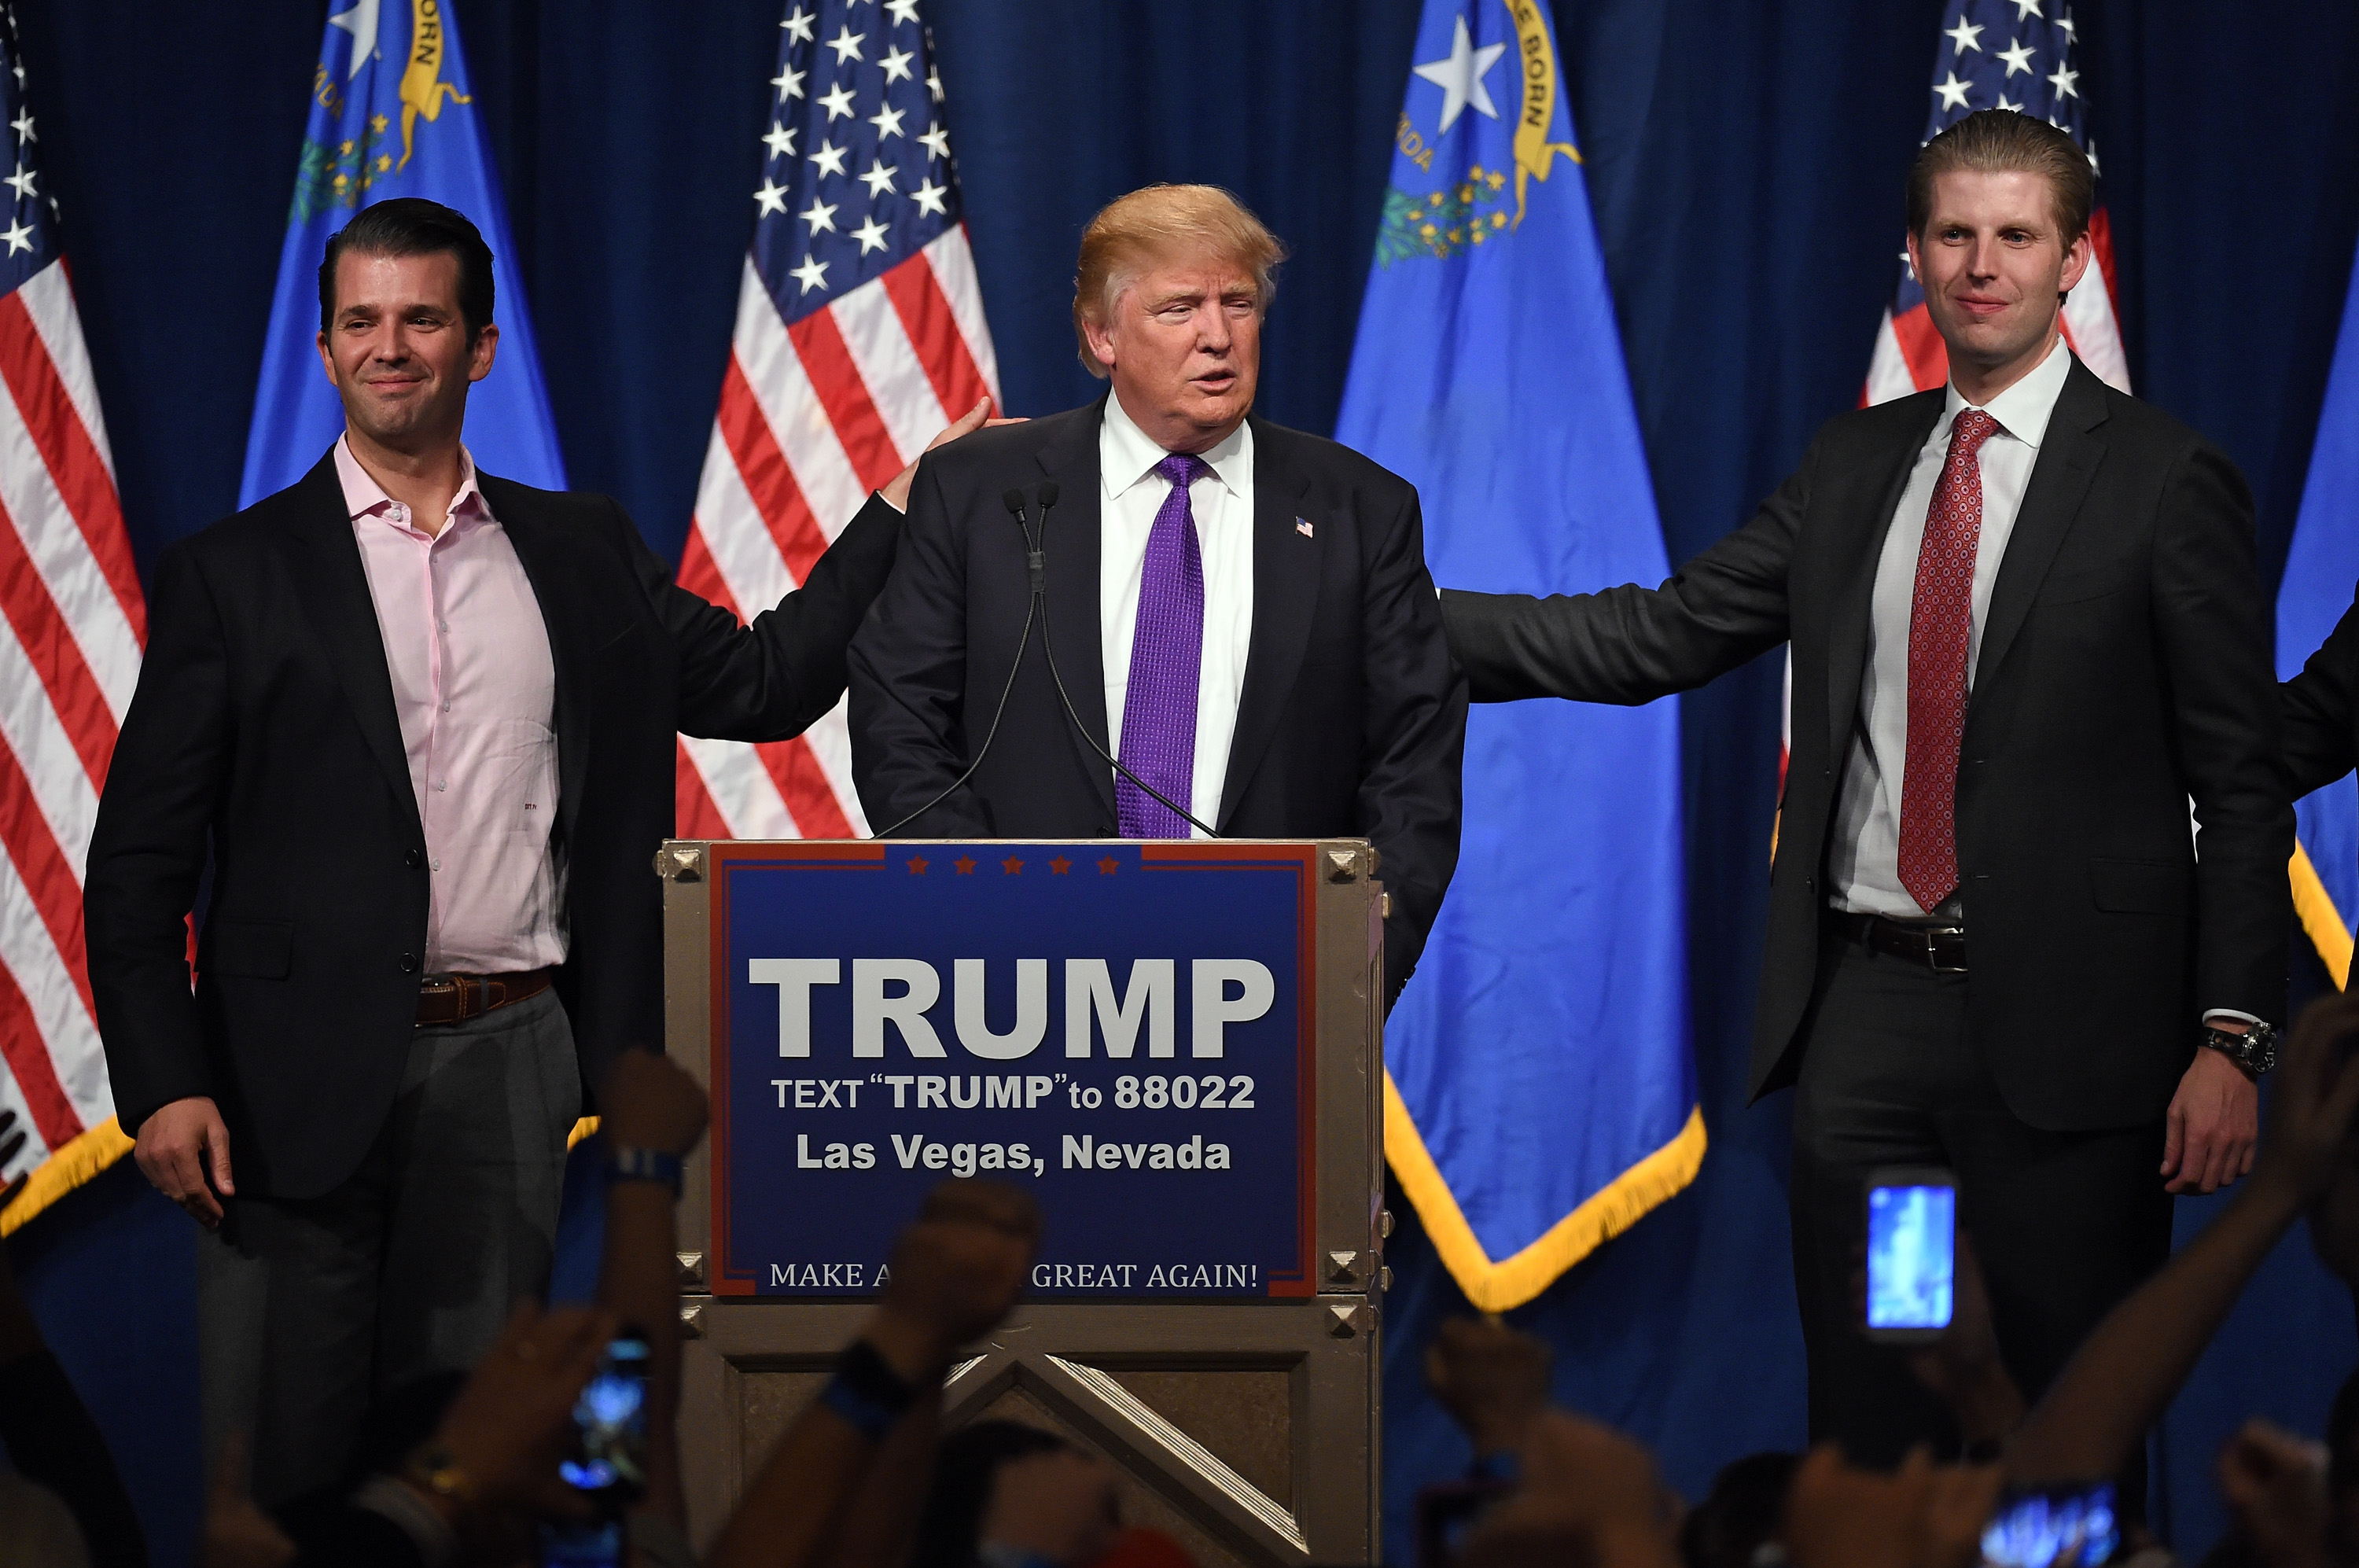 Republican presidential candidate Donald Trump (C) speaks as his sons Donald Trump Jr. (L) and Eric Trump (R) look on during a caucus night watch party at the Treasure Island Hotel &amp; Casino on February 23, 2016 in Las Vegas, Nevada. The New York businessman won his third state victory in a row in the "first in the West" caucuses. (Ethan Miller—Getty Images)